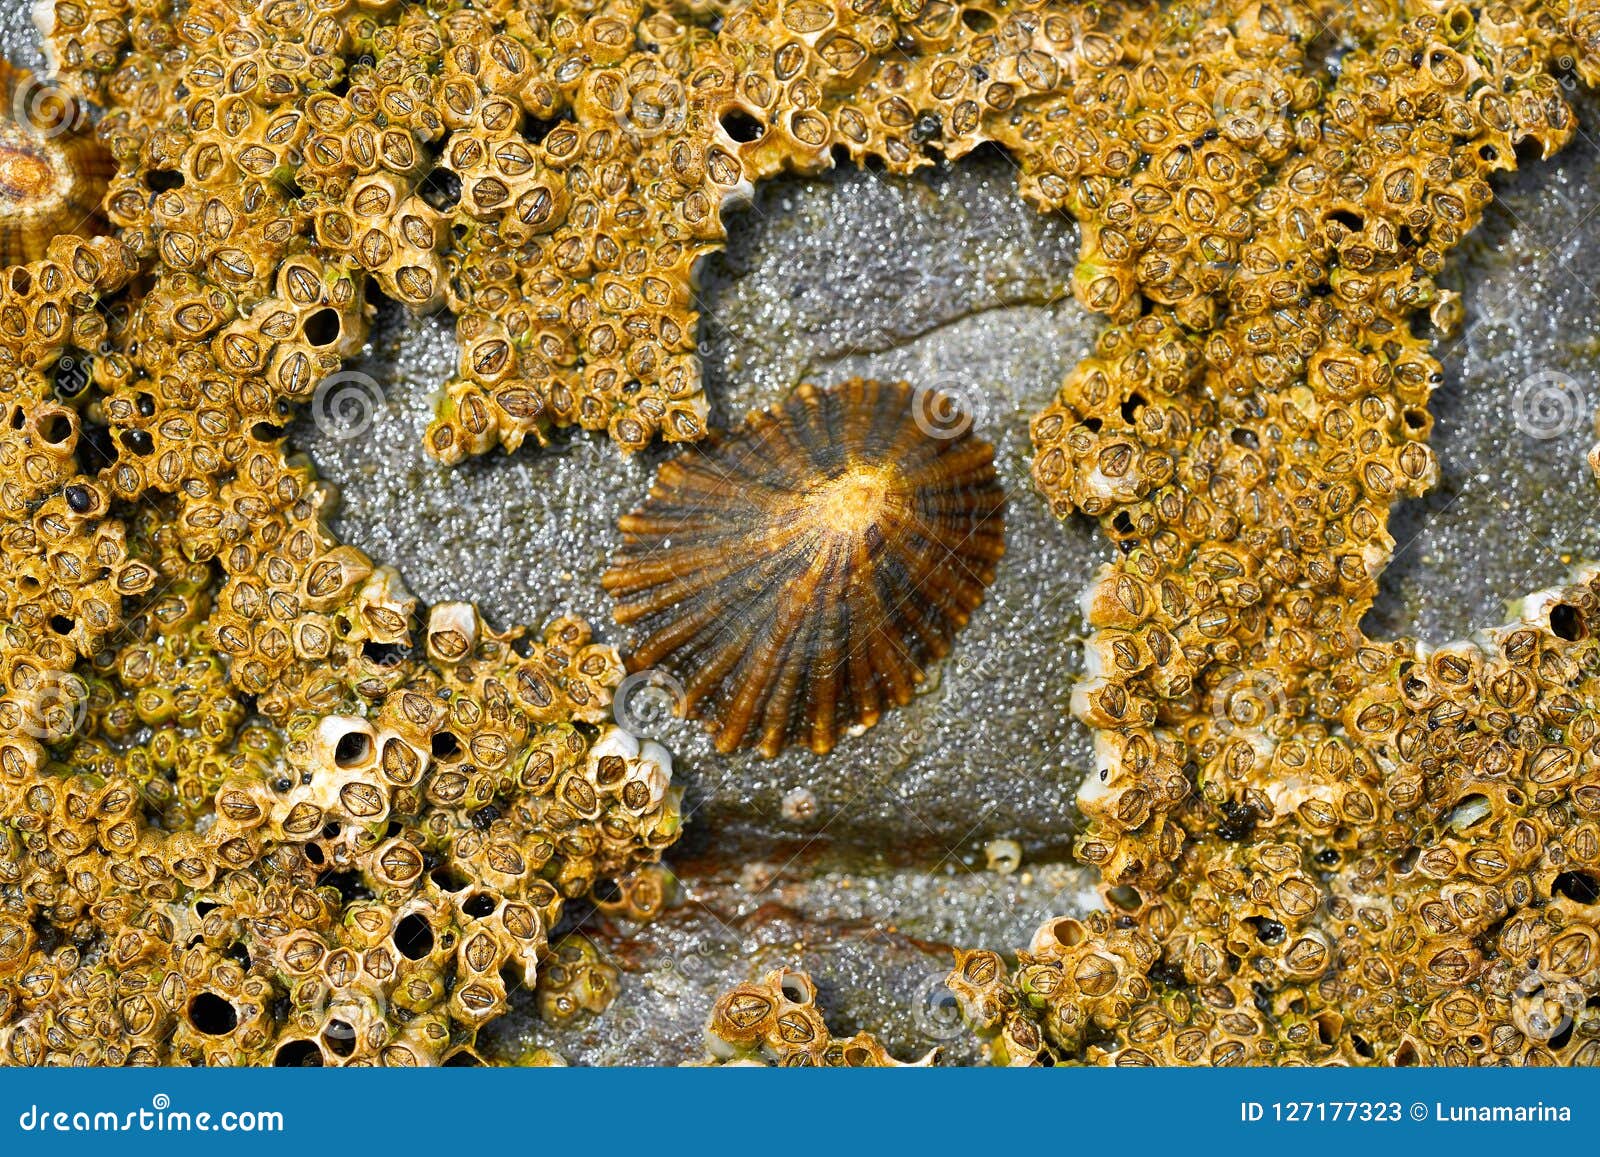 lapas limpet barnacles in ribadeo galicia of lugo